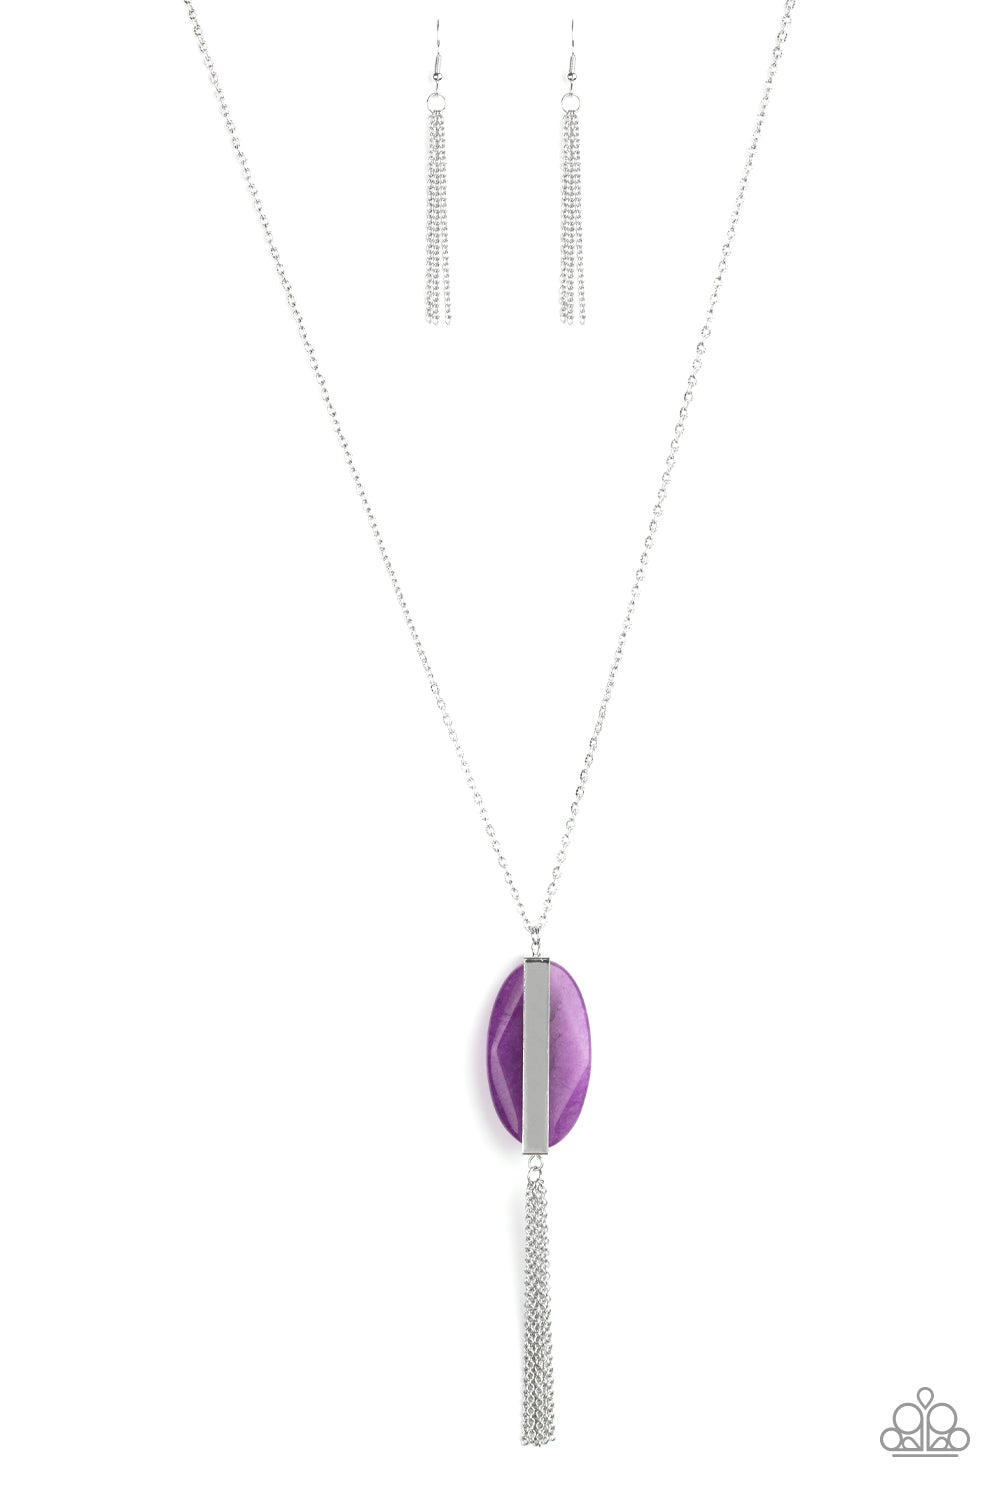 Tranquility Trend - Purple necklace